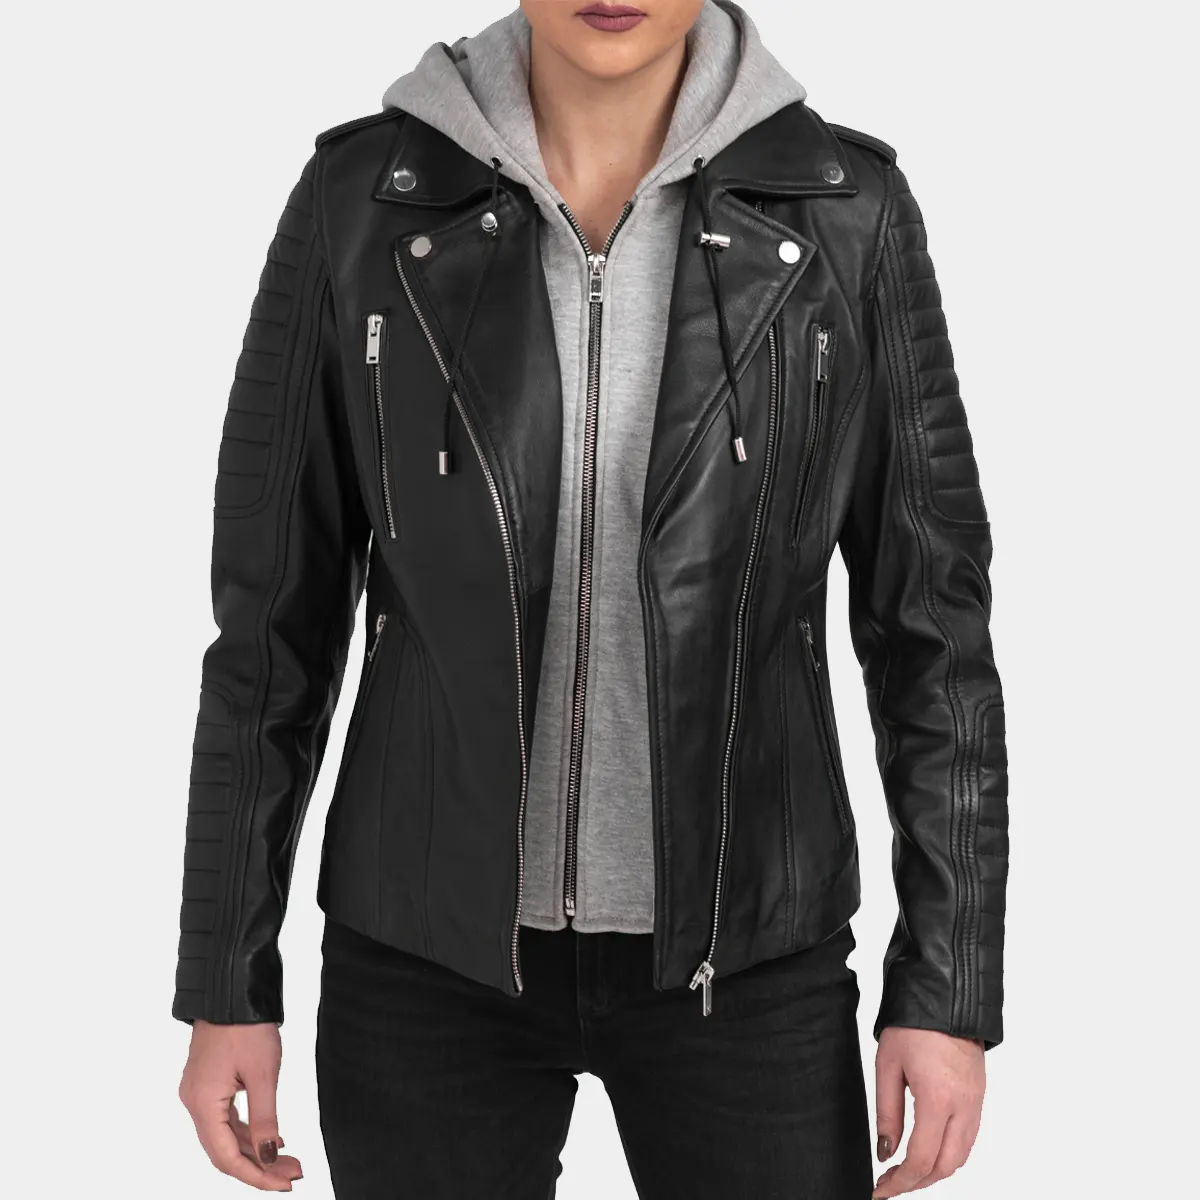 Bagheria Black Womens Leather Jacket with Hood